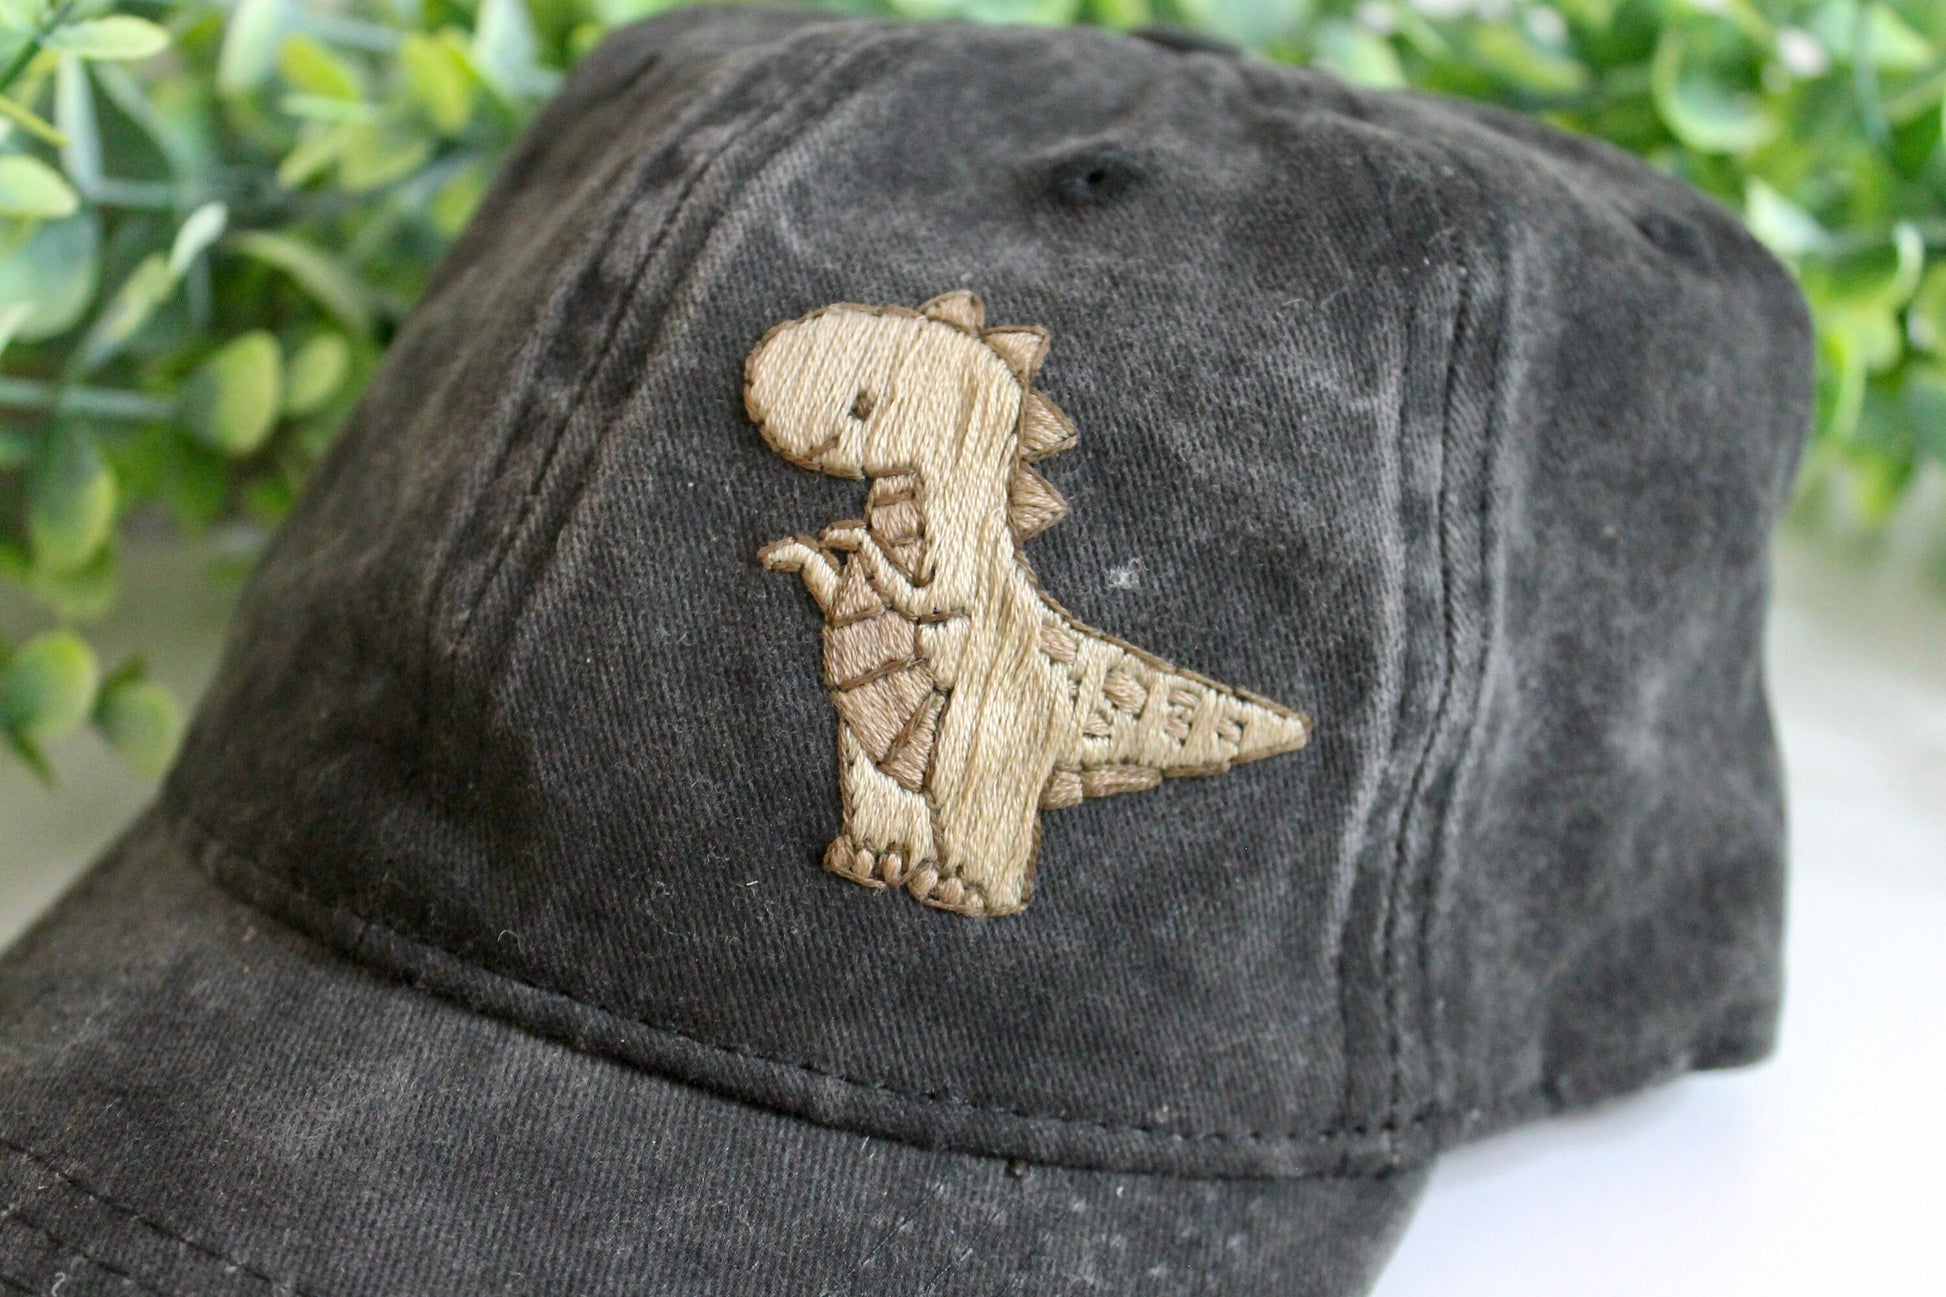 Dino hat embroidery | black and brown | dinosaur | baseball cap | hand embroidery | gift idea